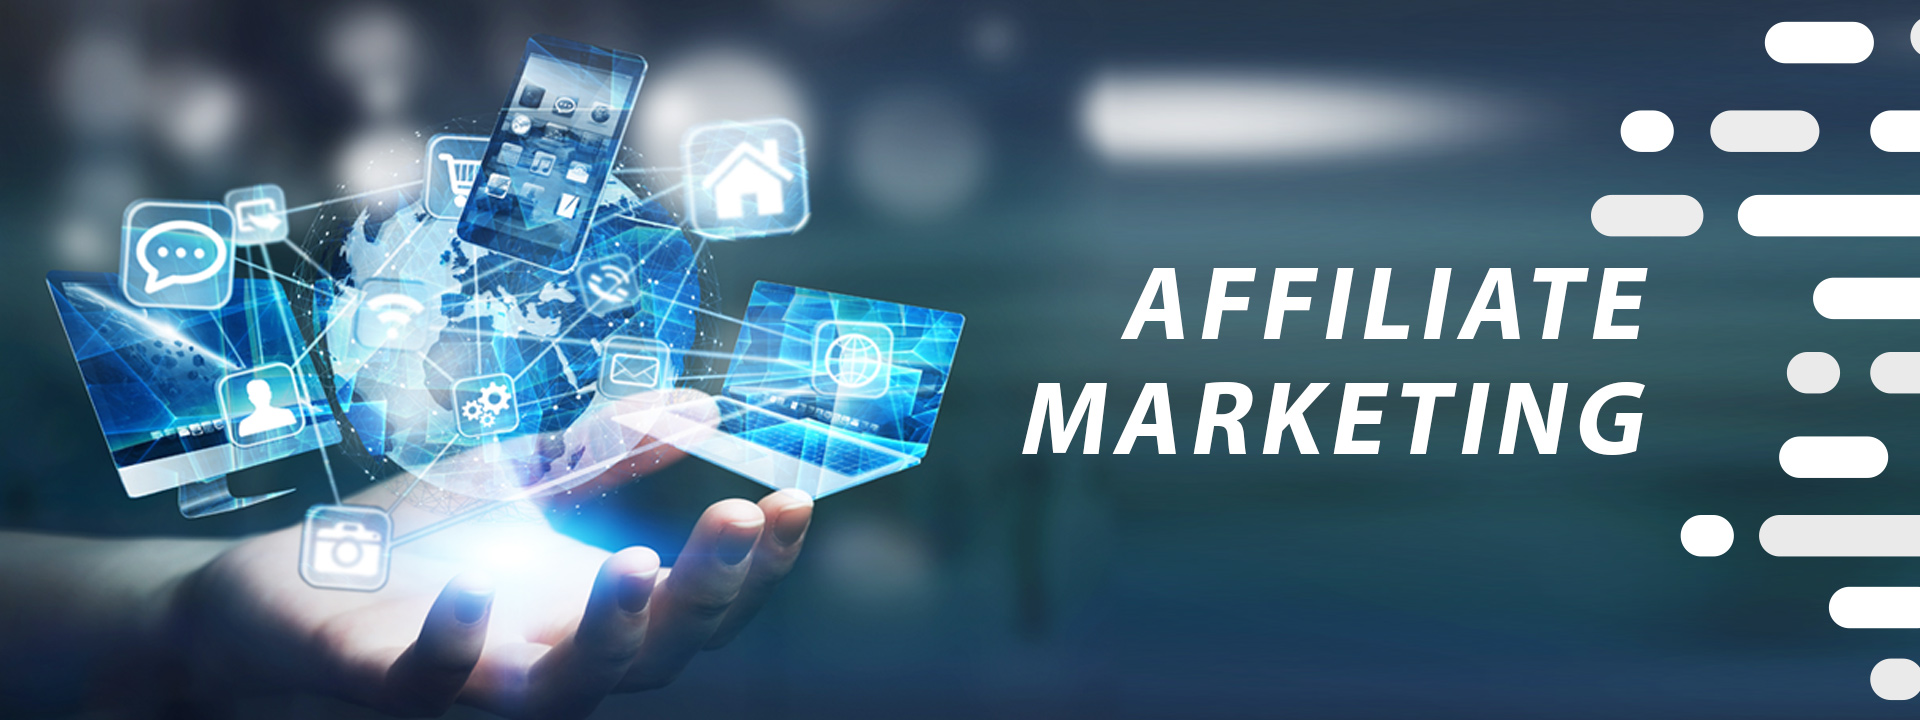 Affiliate Marketing Services in USA